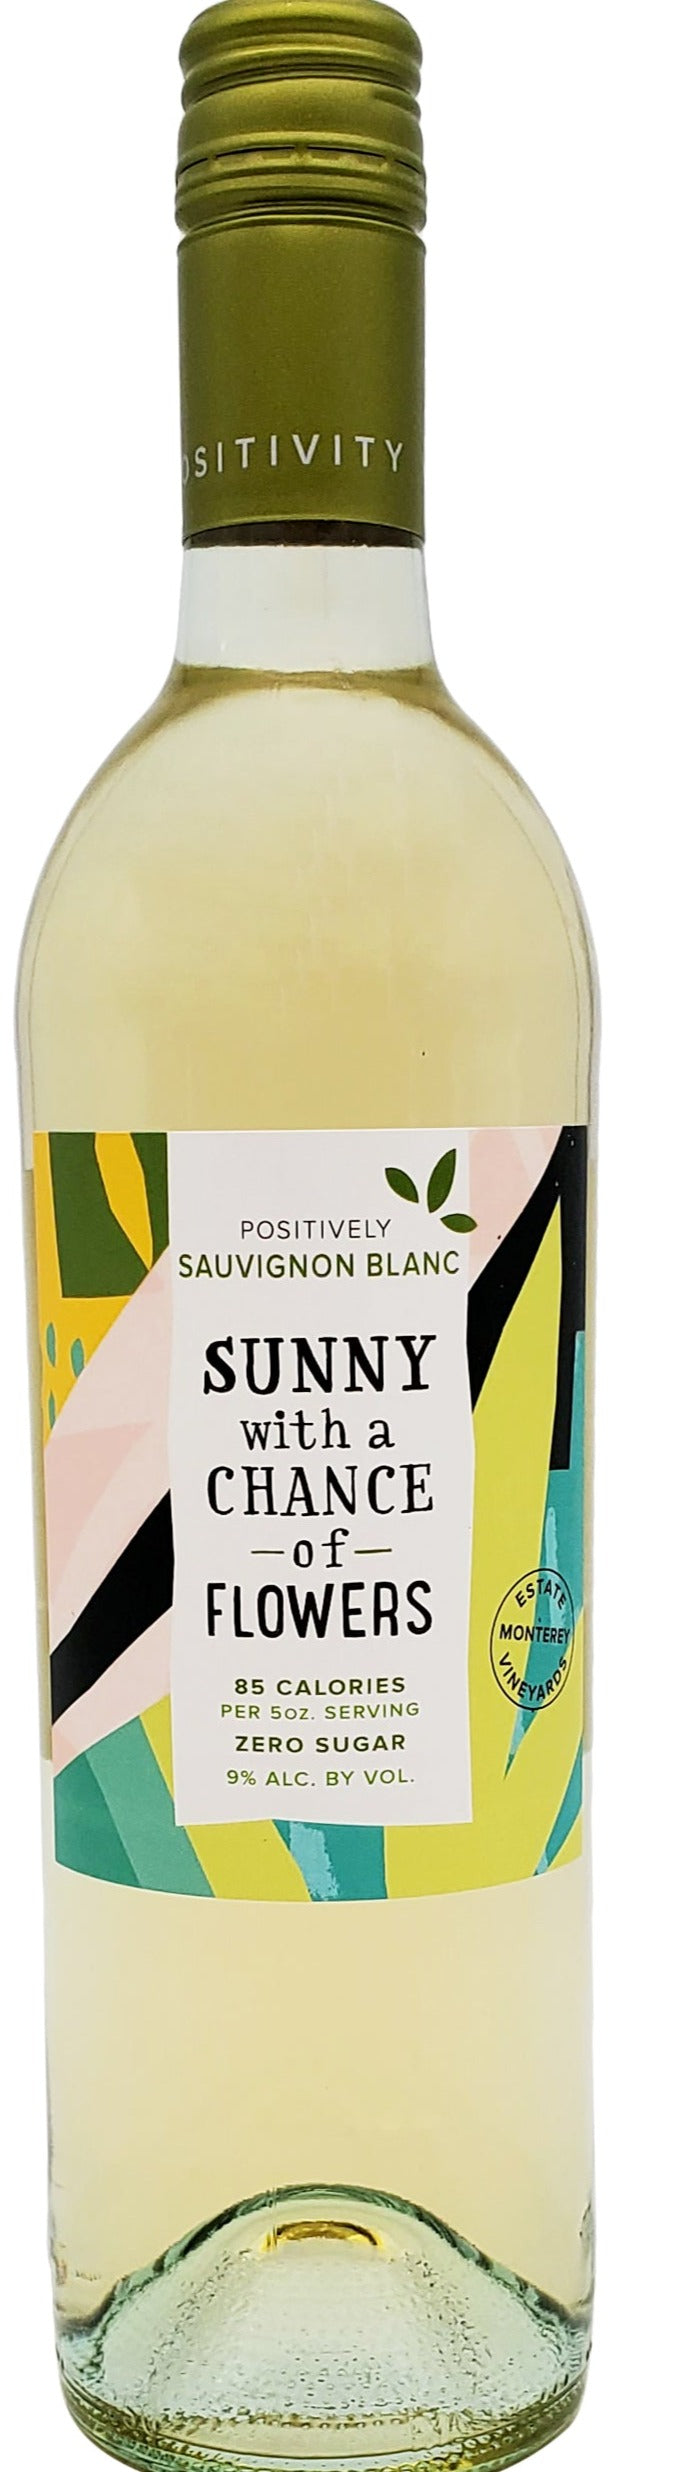 SUNNY WITH A CHANCE OF FLOWERS SAUVIGNON BLANC